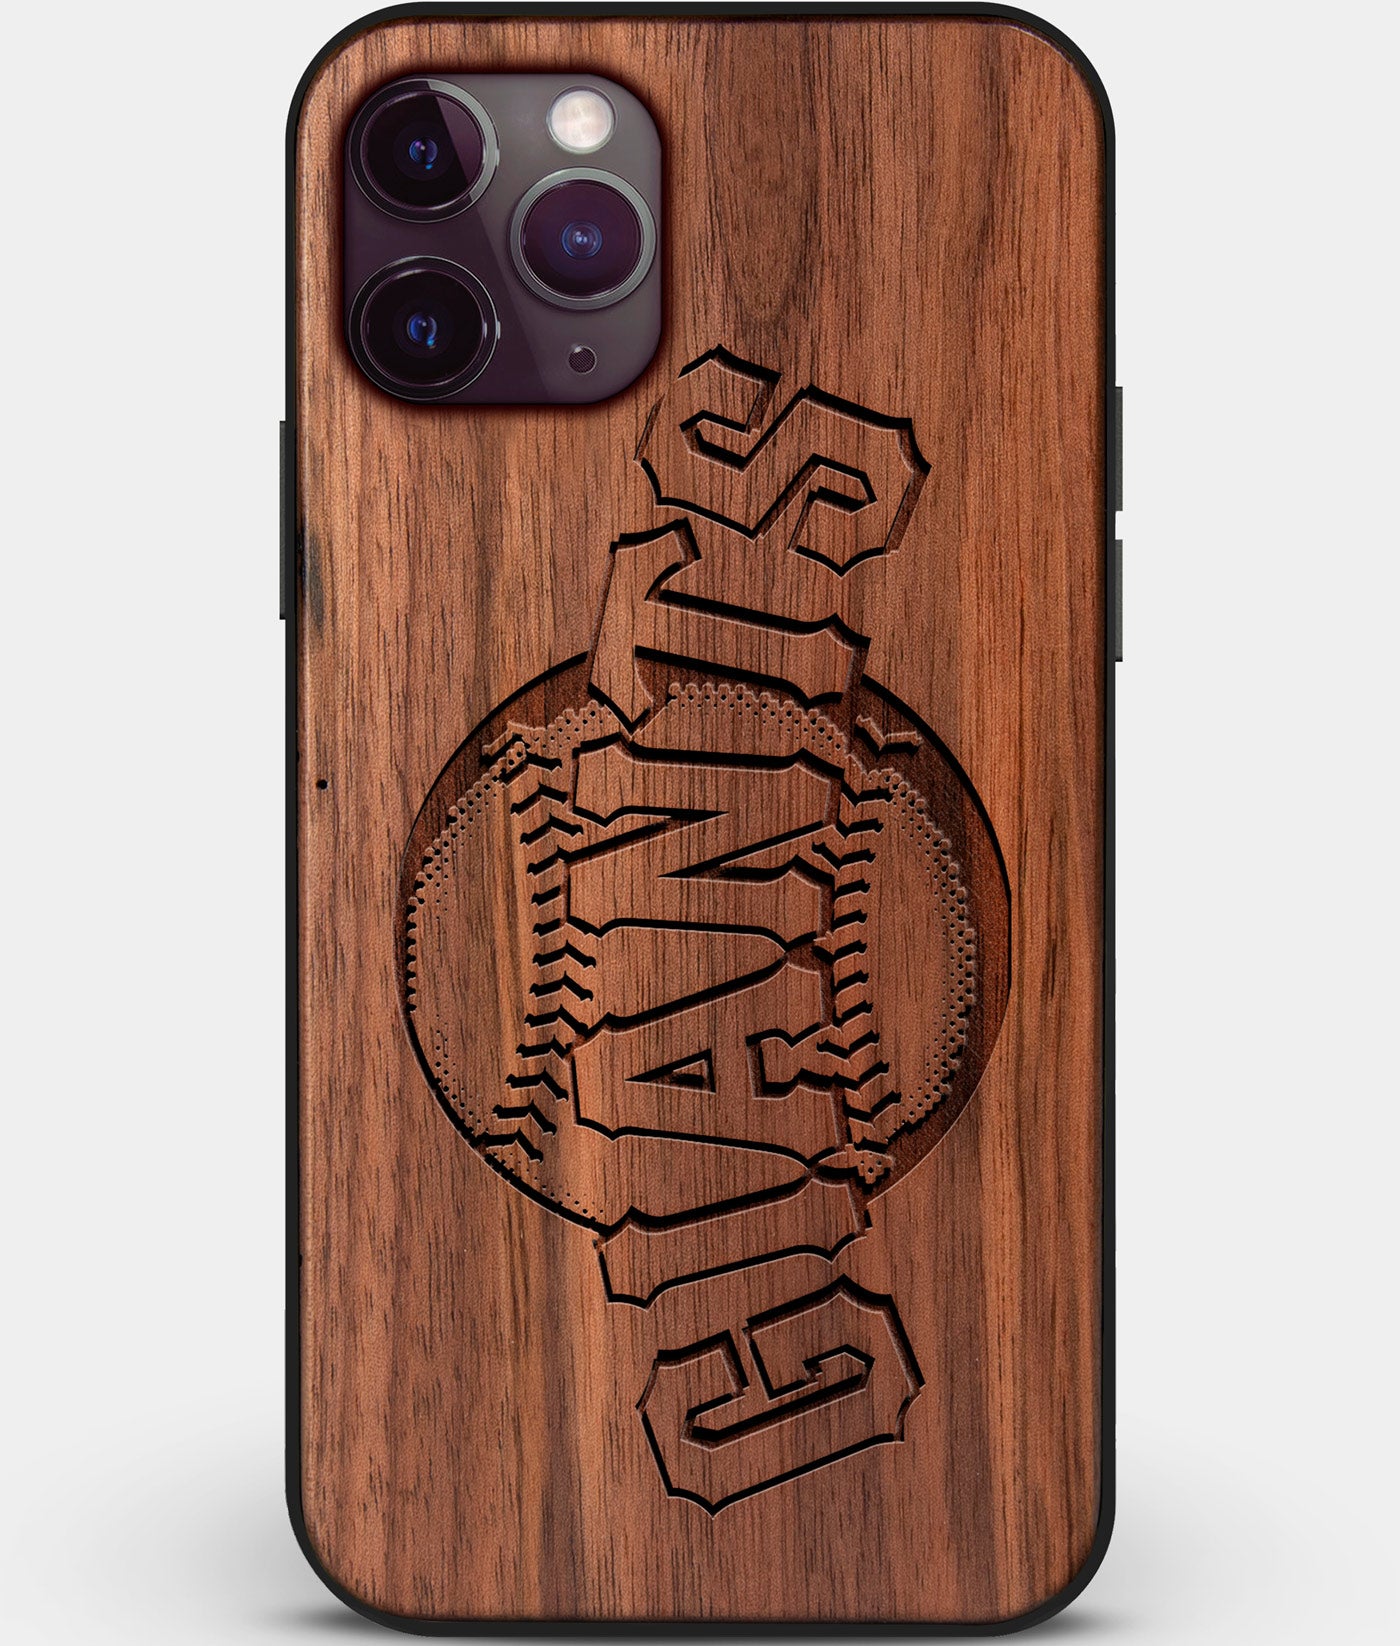 Custom Carved Wood San Francisco Giants iPhone 11 Pro Case | Personalized Walnut Wood San Francisco Giants Cover, Birthday Gift, Gifts For Him, Monogrammed Gift For Fan | by Engraved In Nature